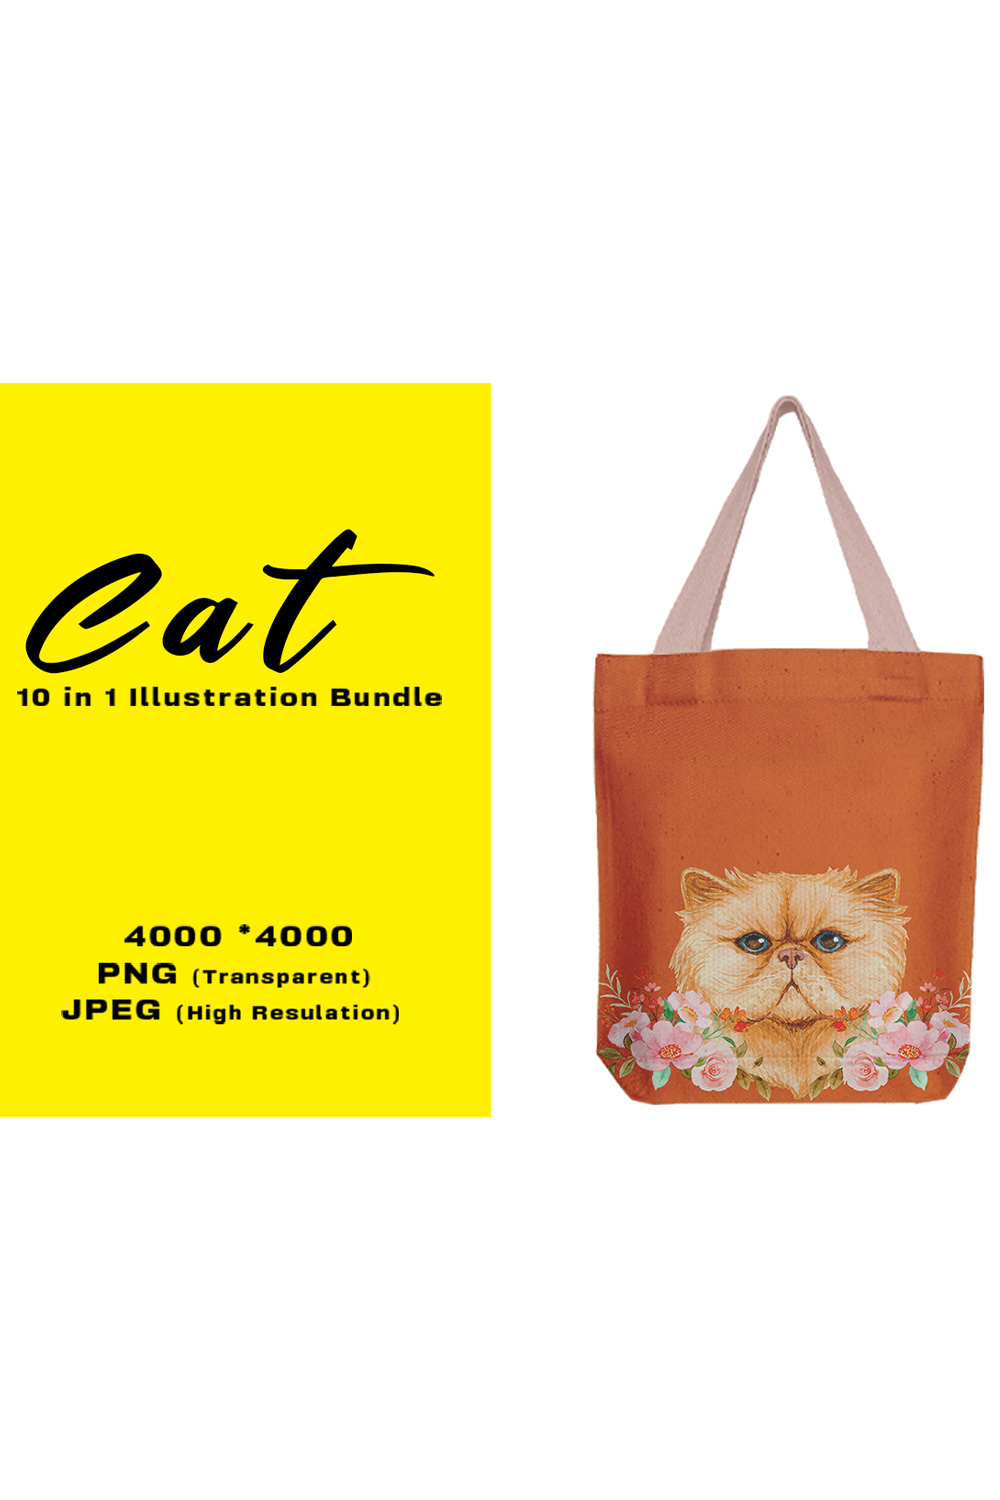 Image of a bag with an irresistible print with a cat